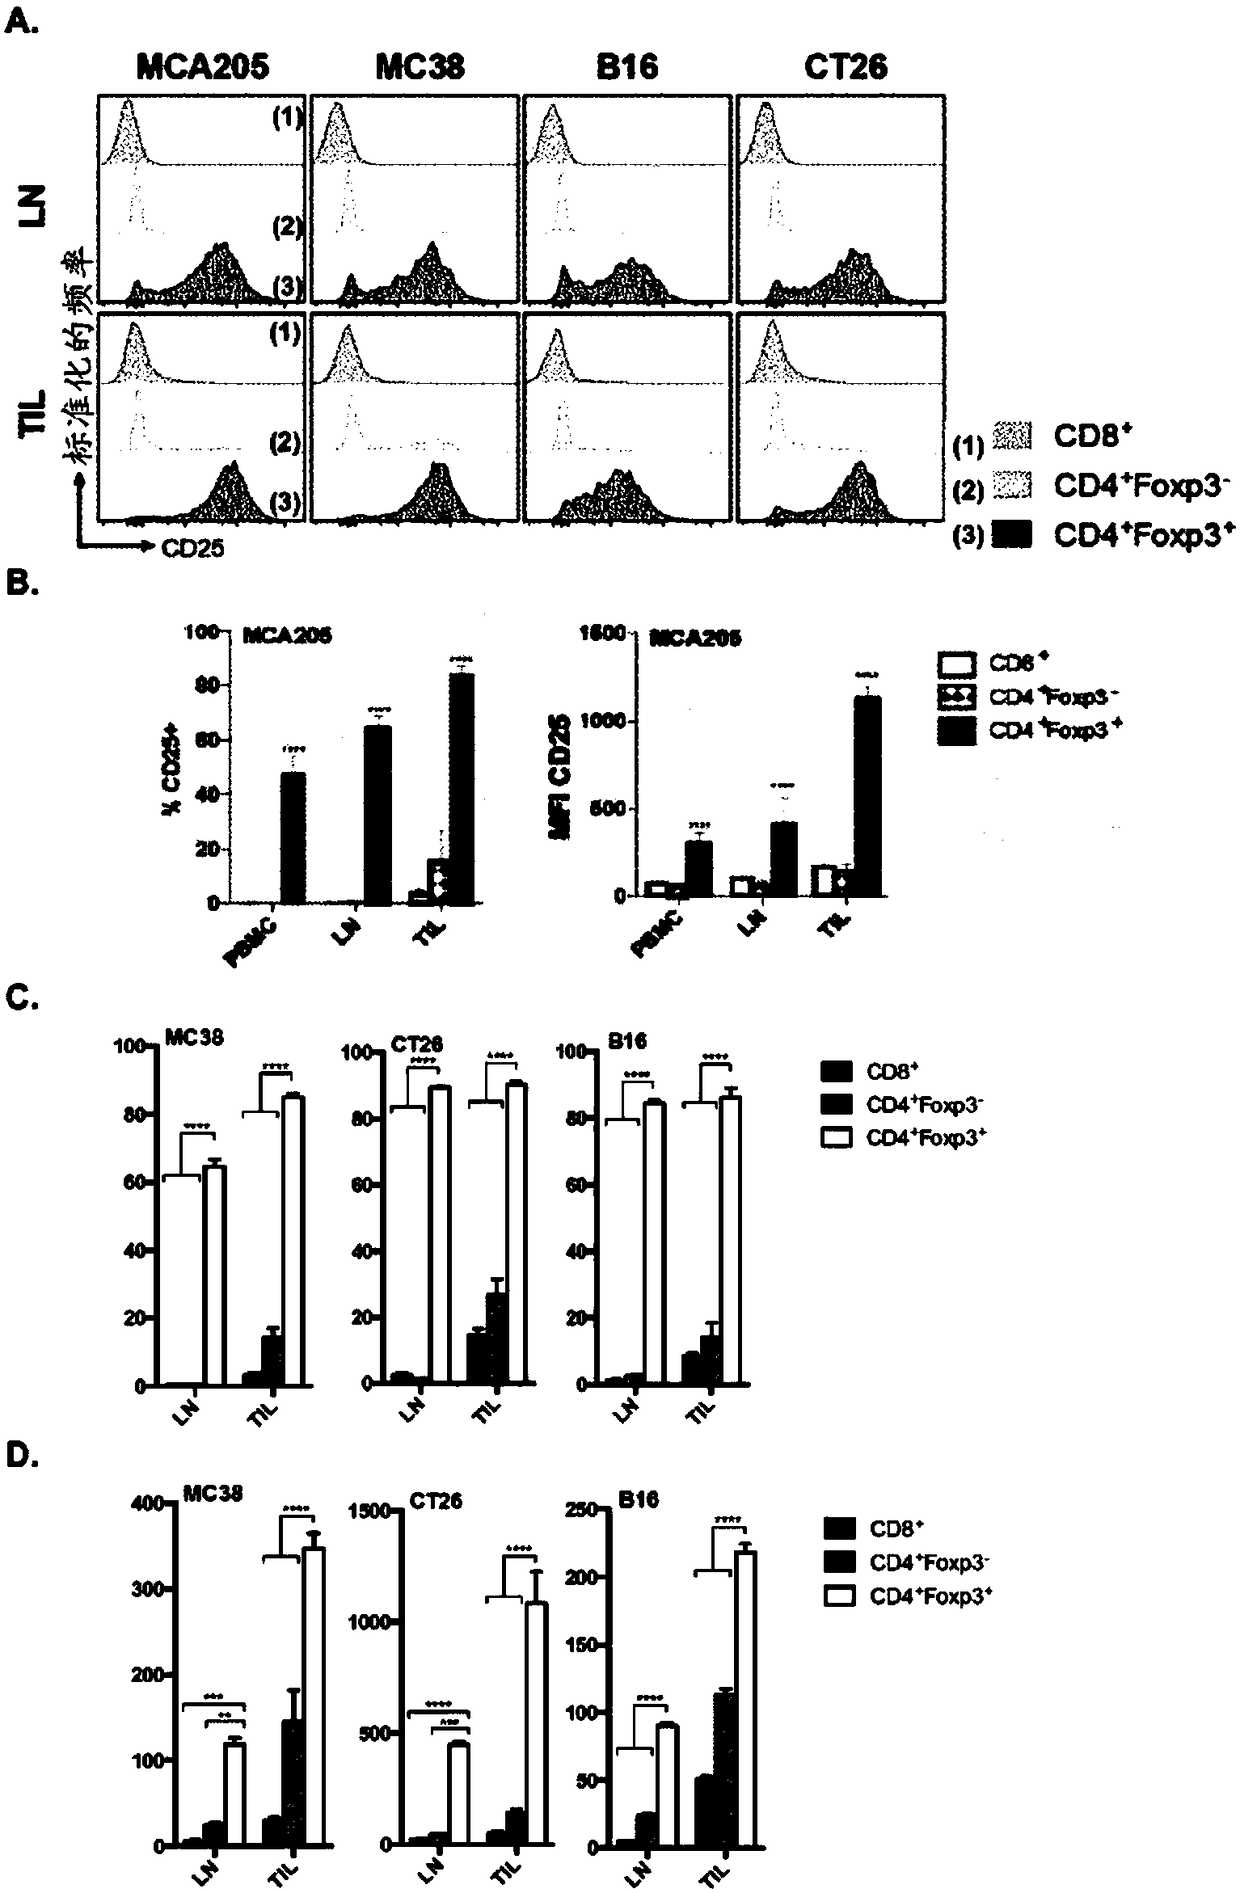 Anti cd25 FC gamma receptor bispecific antibodies for tumor specific cell depletion